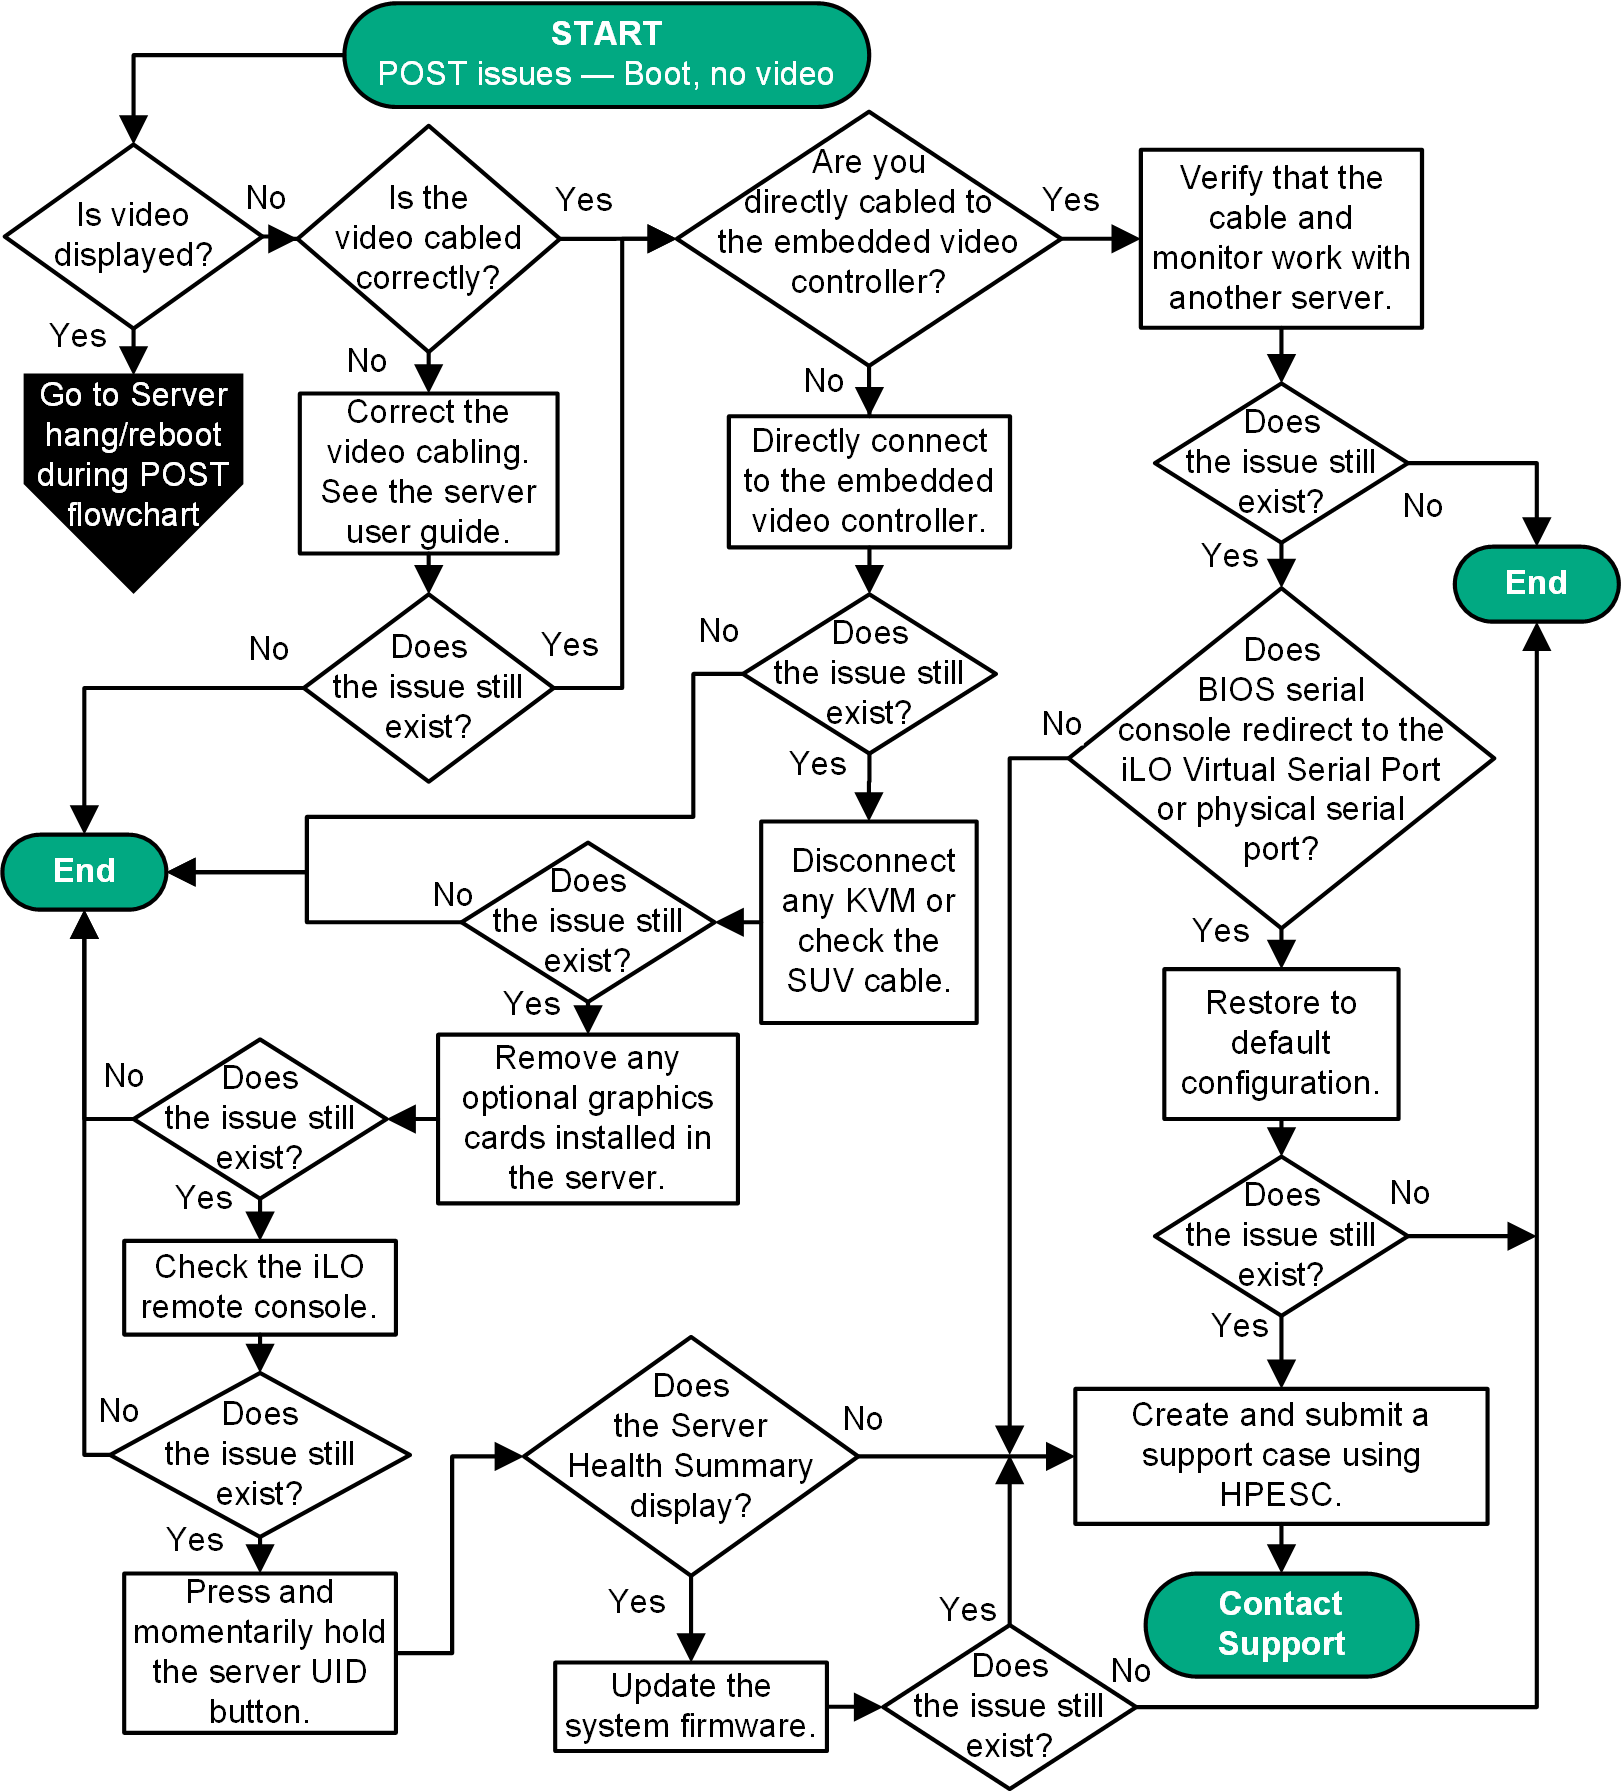 POST issues—Boot, no video flowchart